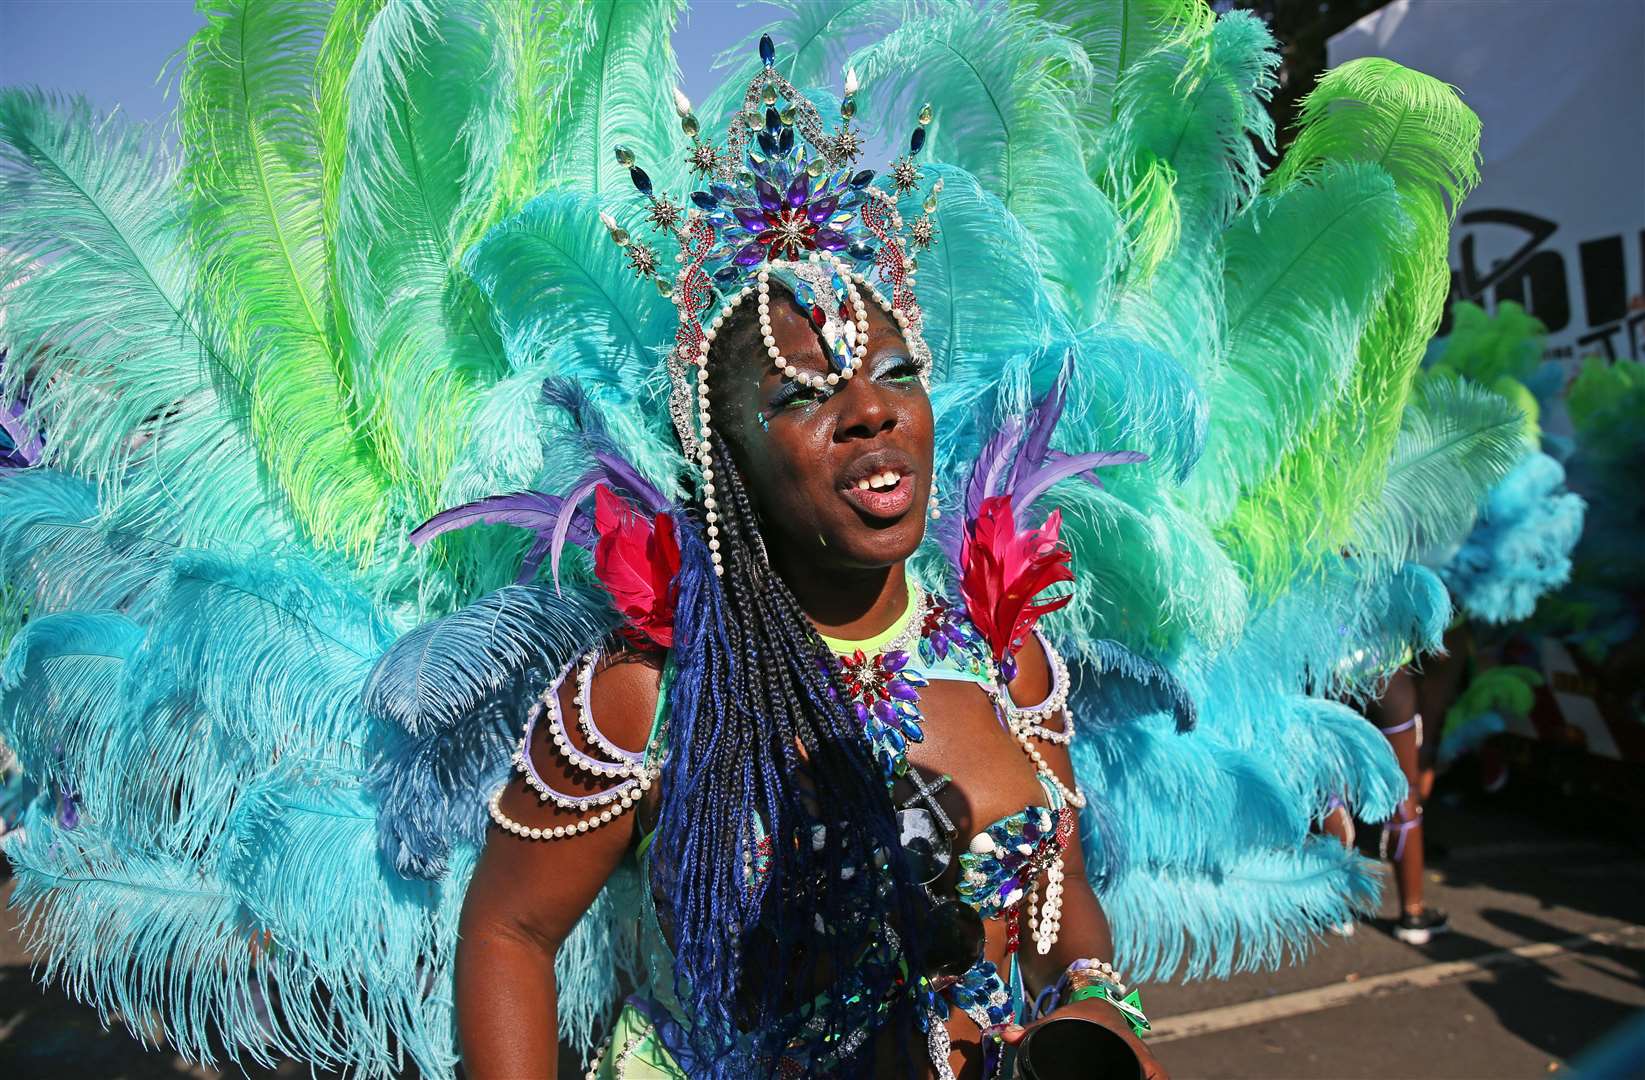 Notting Hill Carnival has been removed from the streets due to Covid-19 in its 55th year (Hollie Adams/PA)